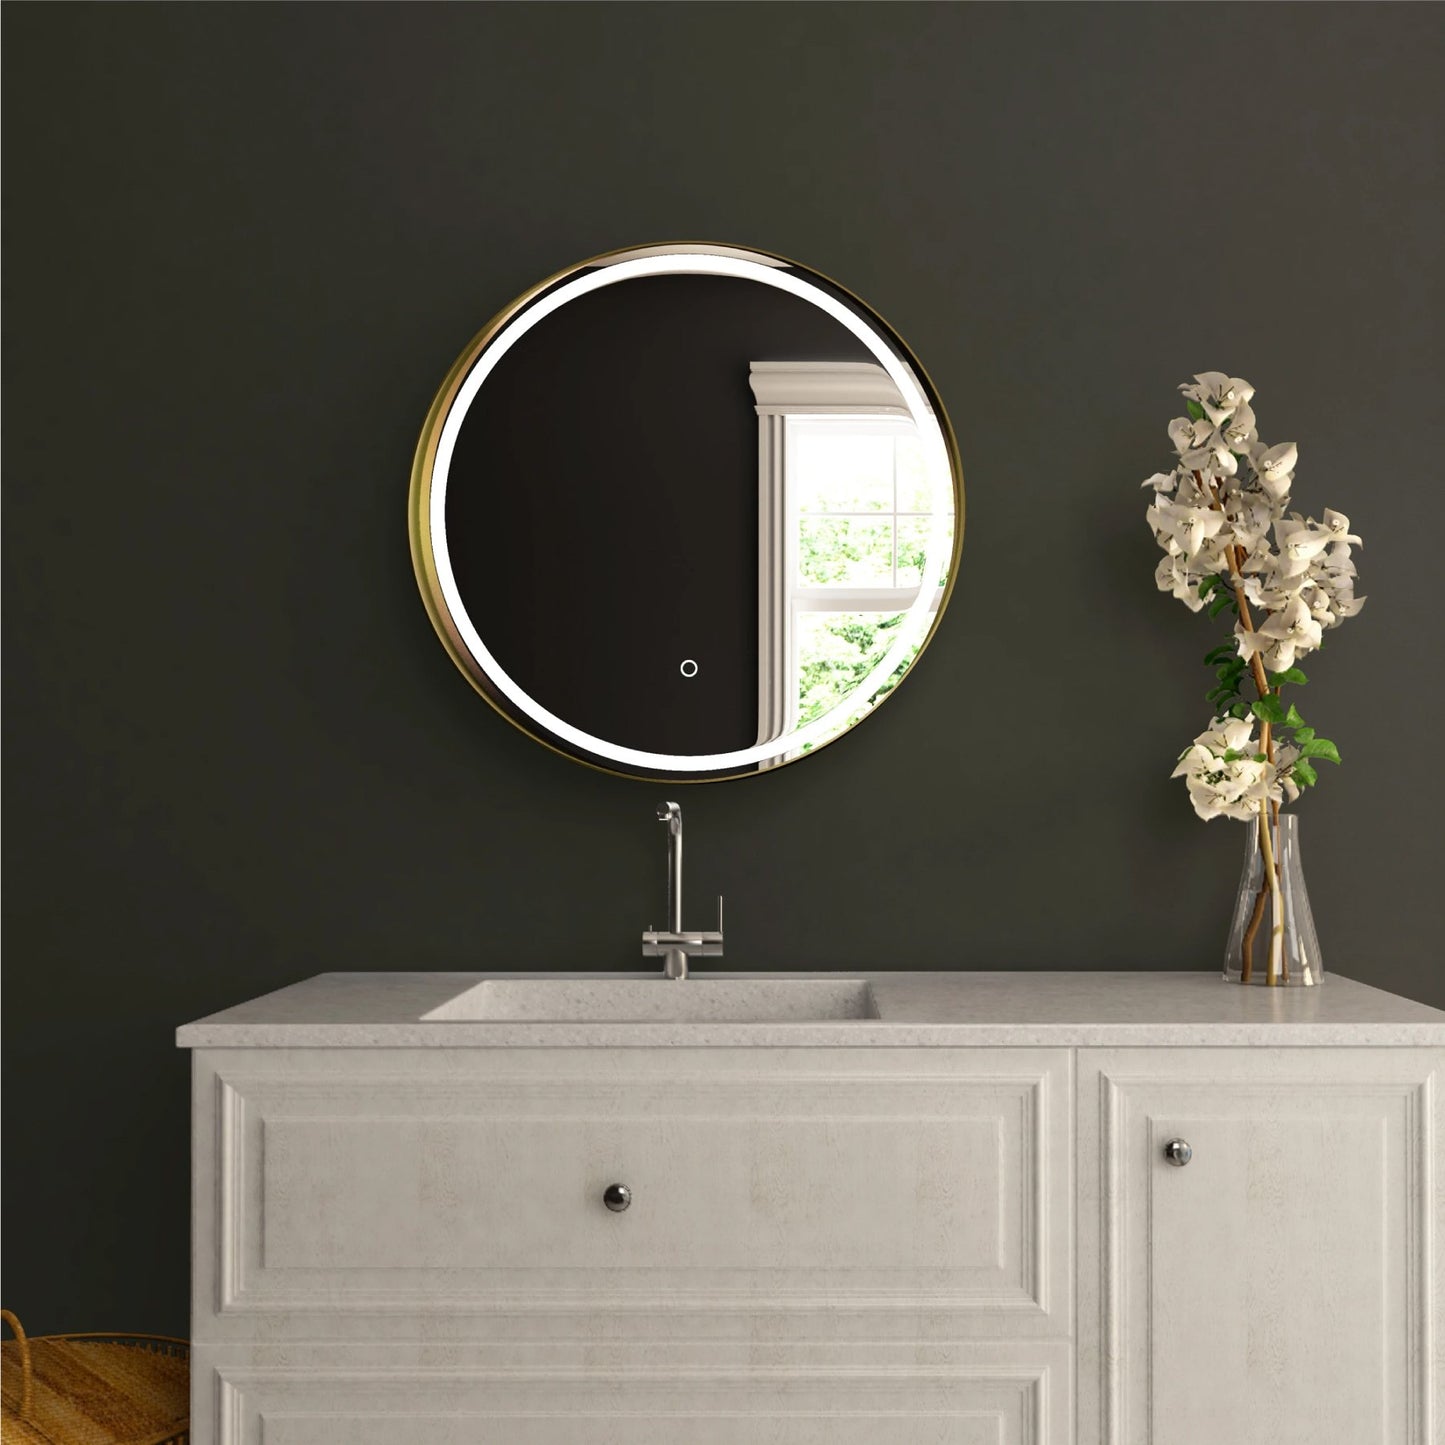 24-inch-round-shelf-led-lighted-mirror-touch-switch-defogger-and-cct-remembrance-raven-round-style